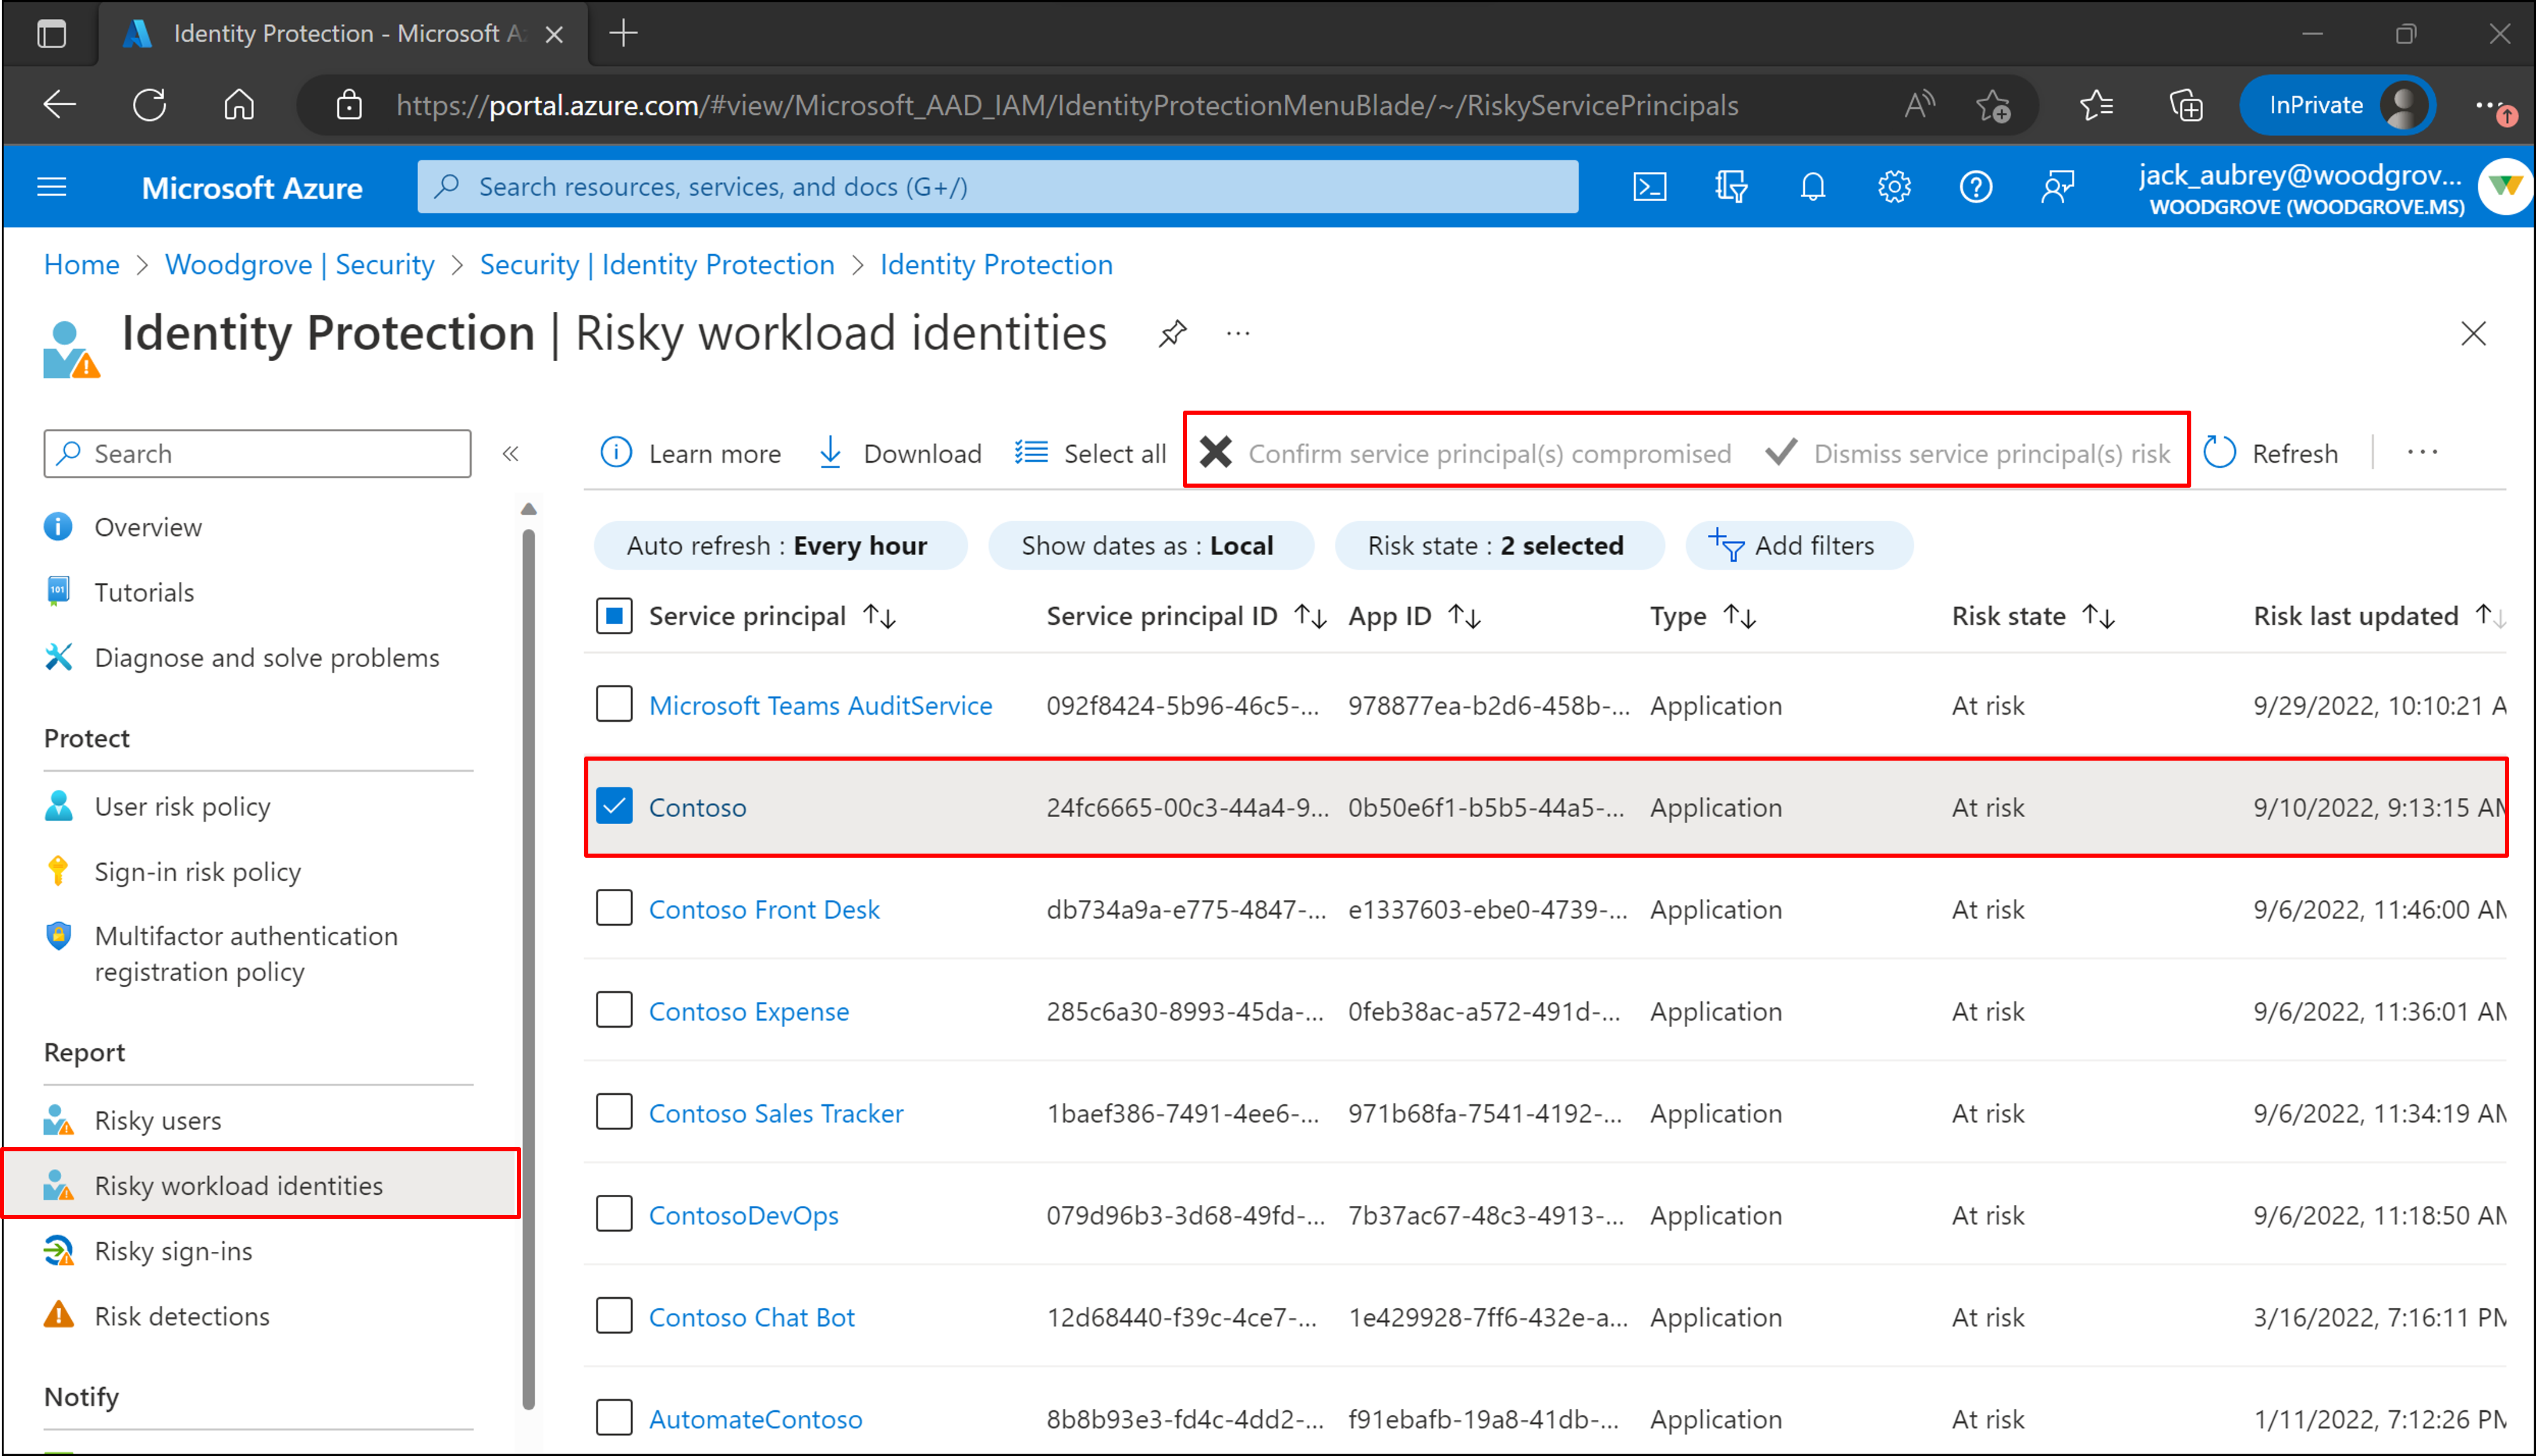 Confirm workload identity compromise or dismiss the risk in the Azure portal.